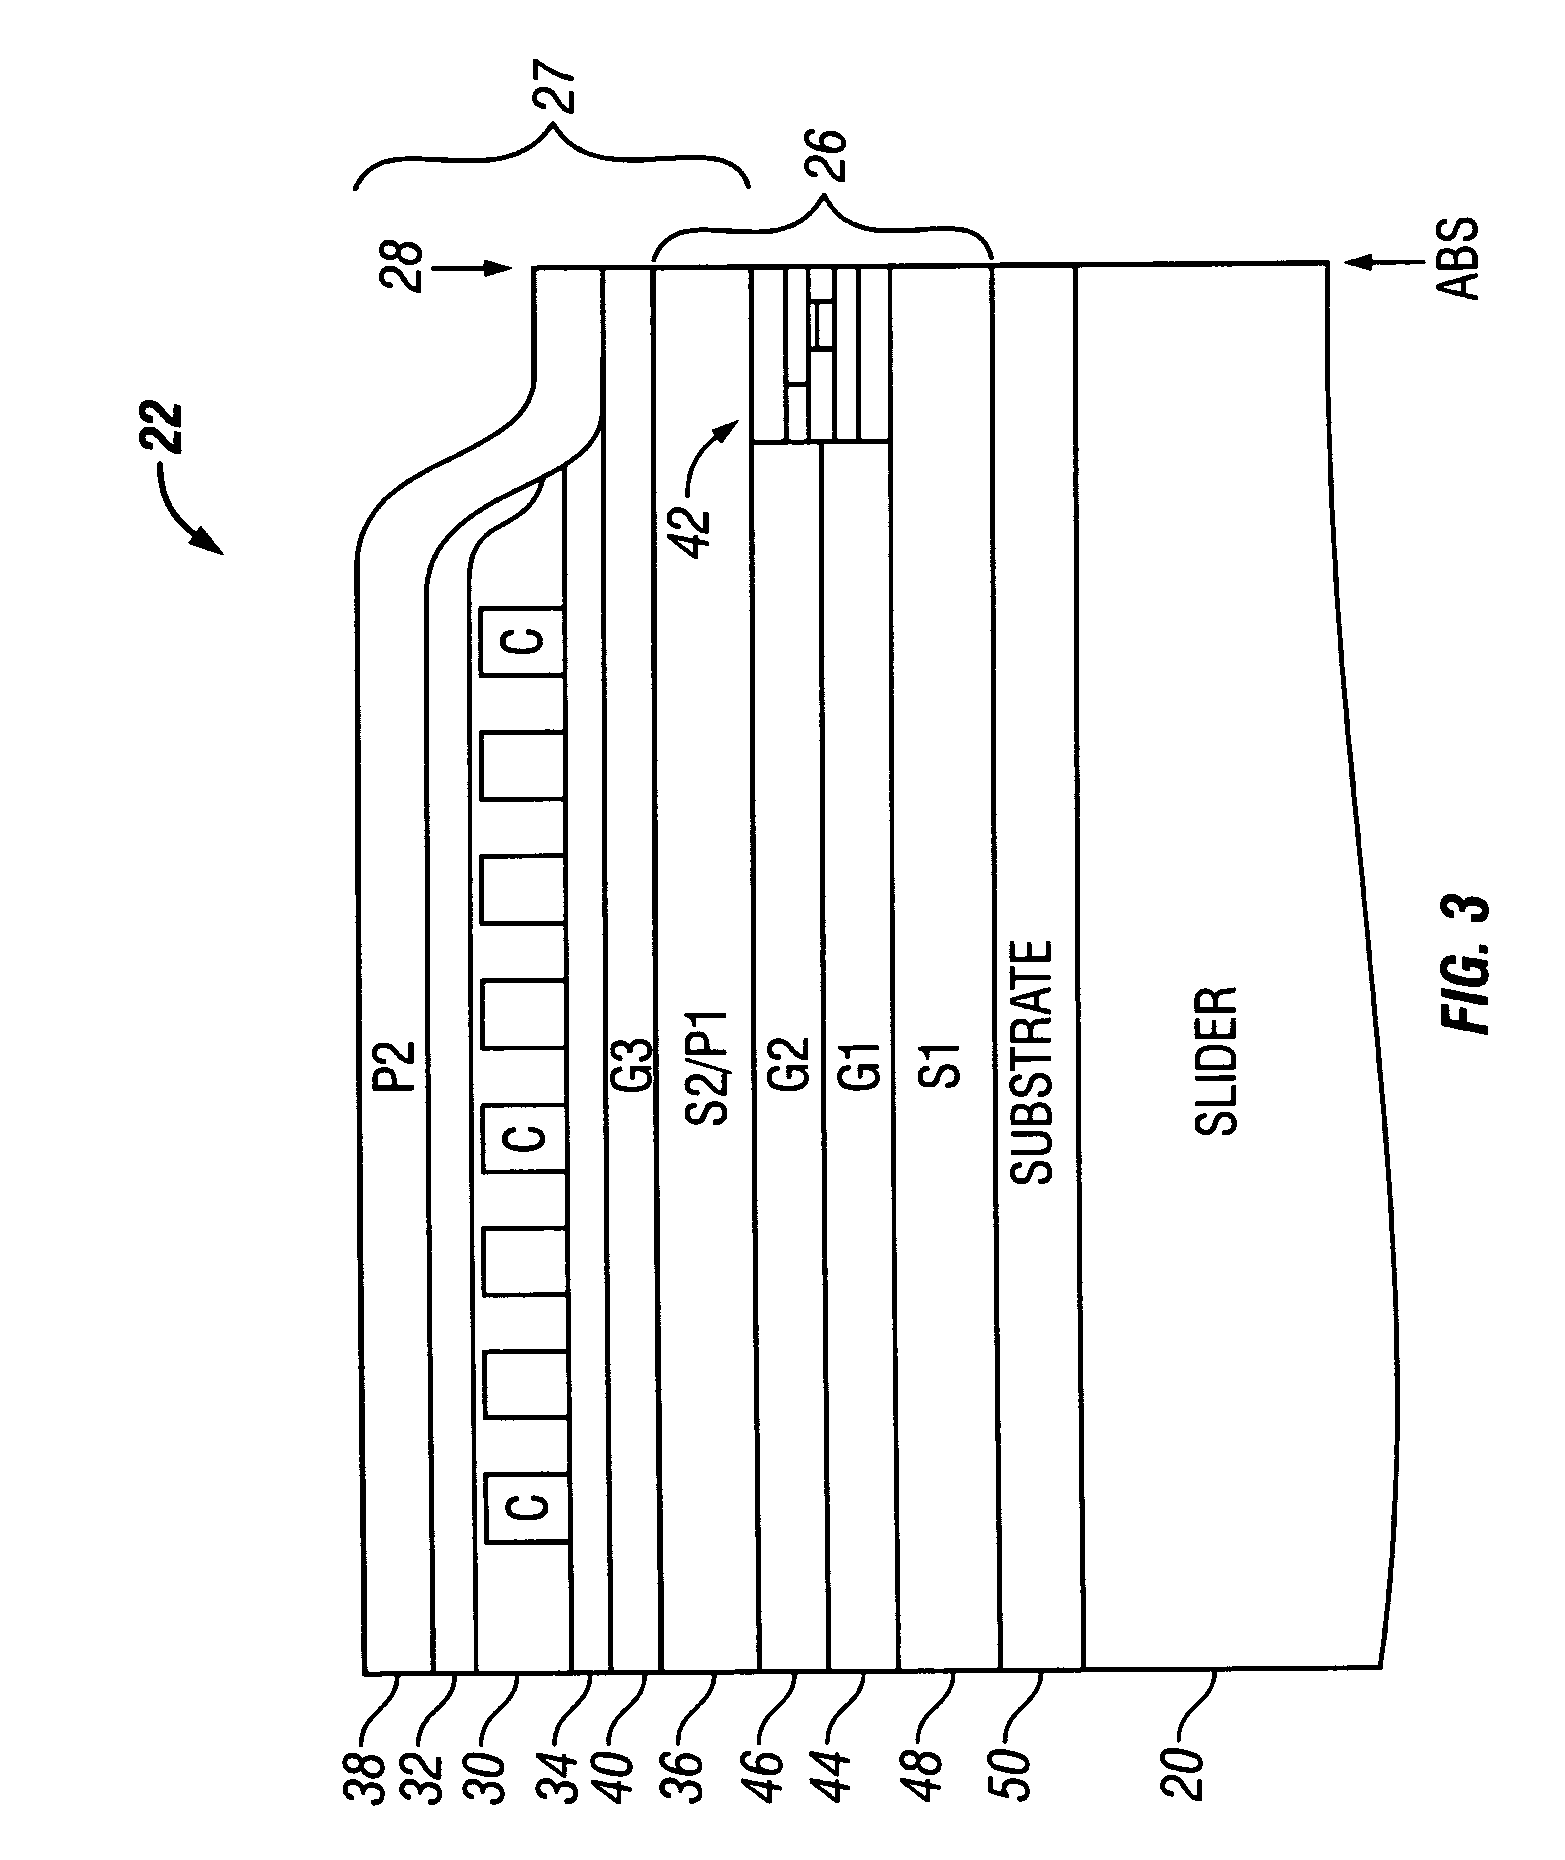 Self aligned magnetoresistive flux guide read head with exchange bias underneath free layer